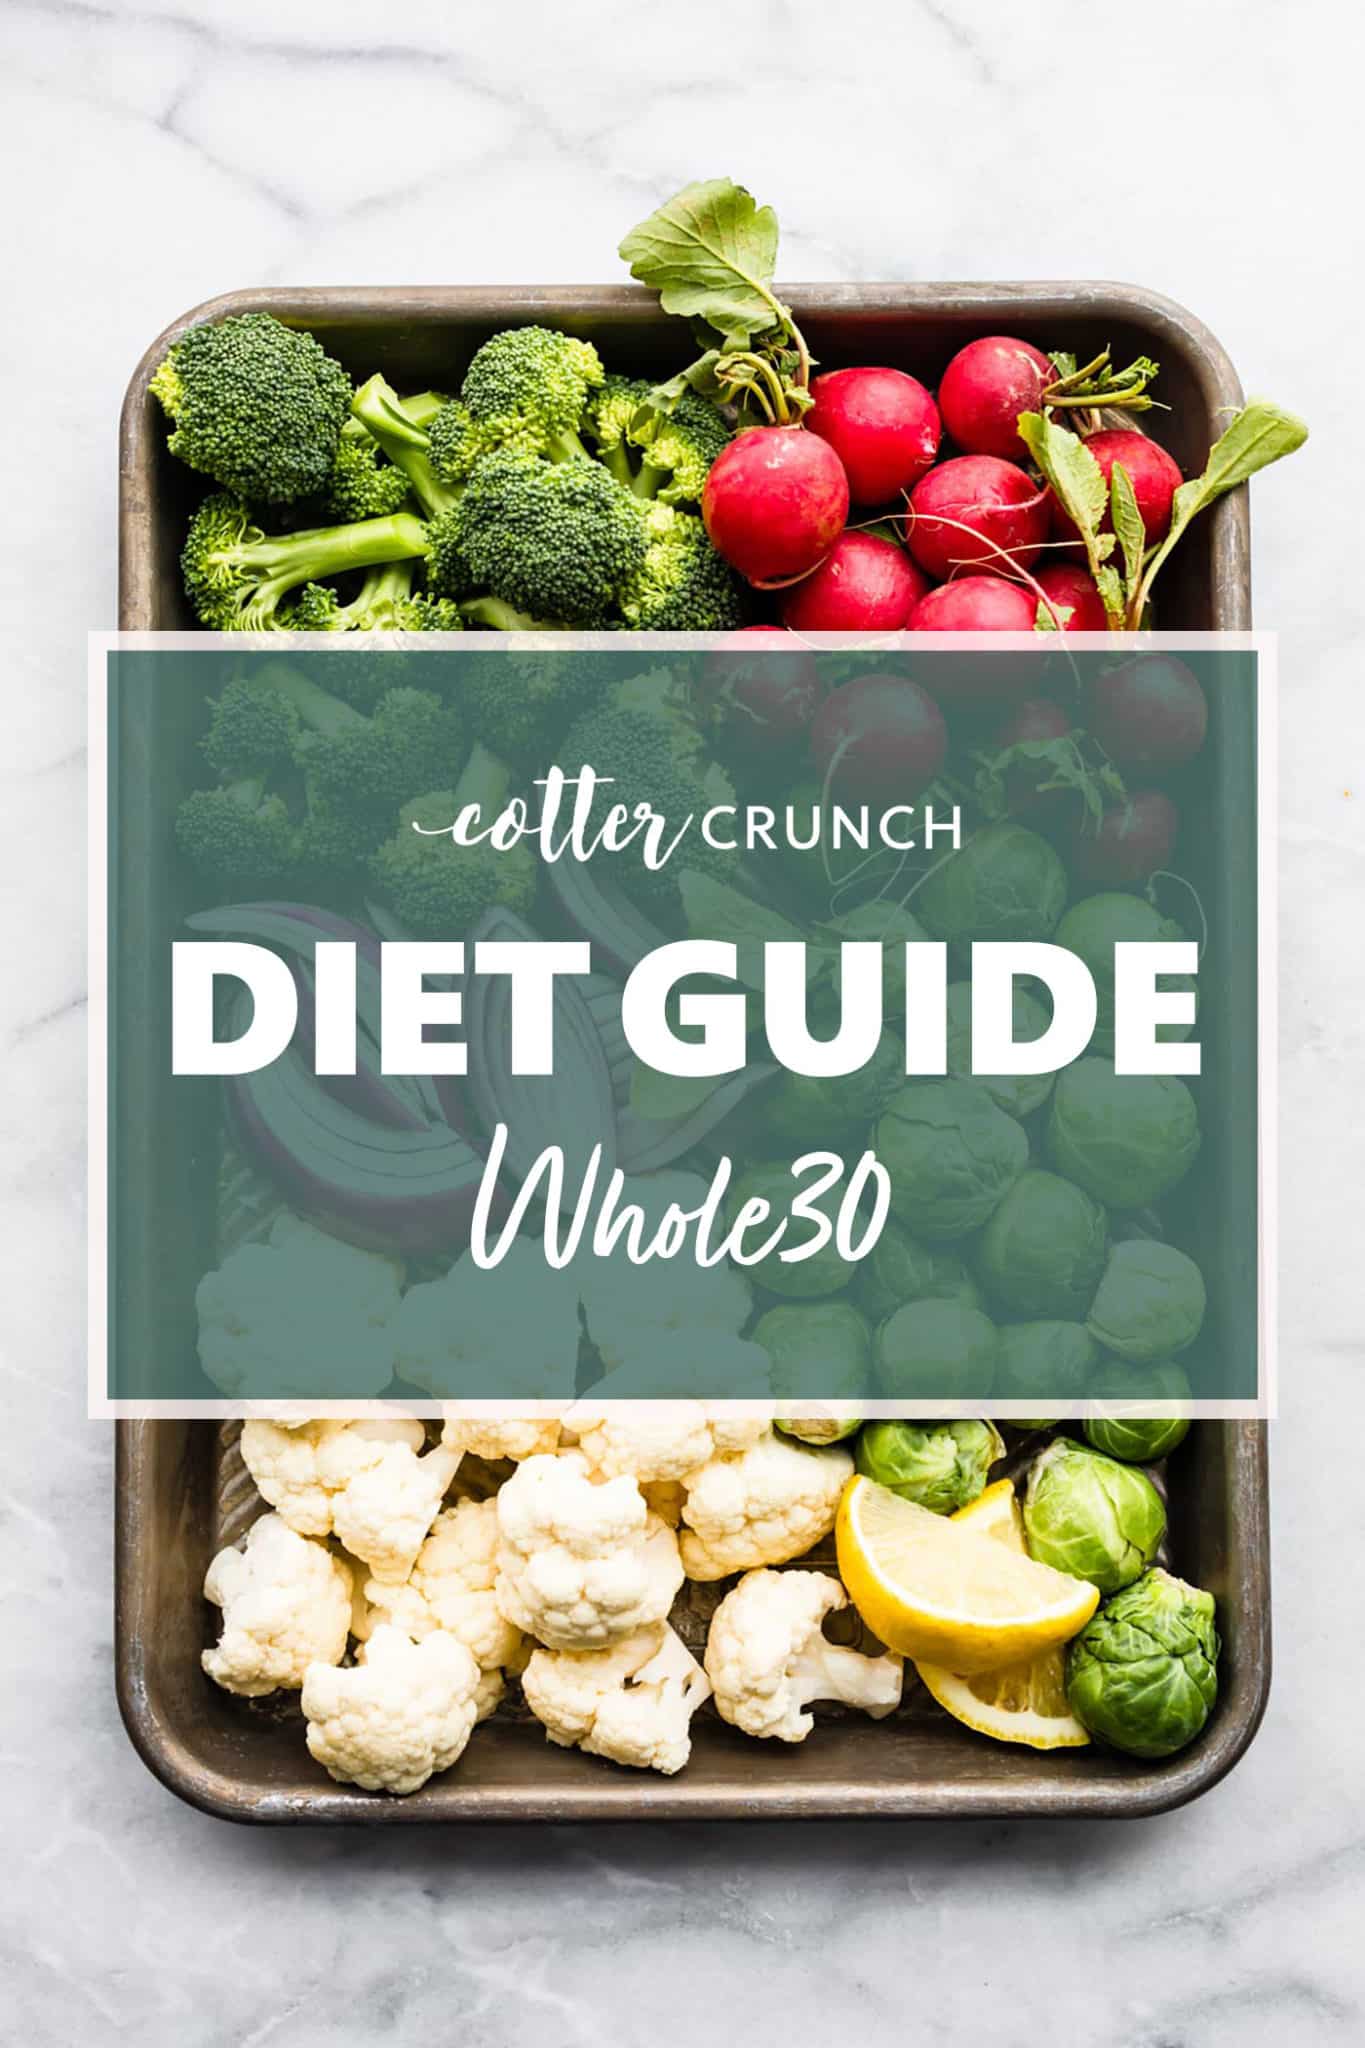 https://www.cottercrunch.com/wp-content/uploads/2022/07/Whole30-Diet-Guide-Featured-scaled.jpg